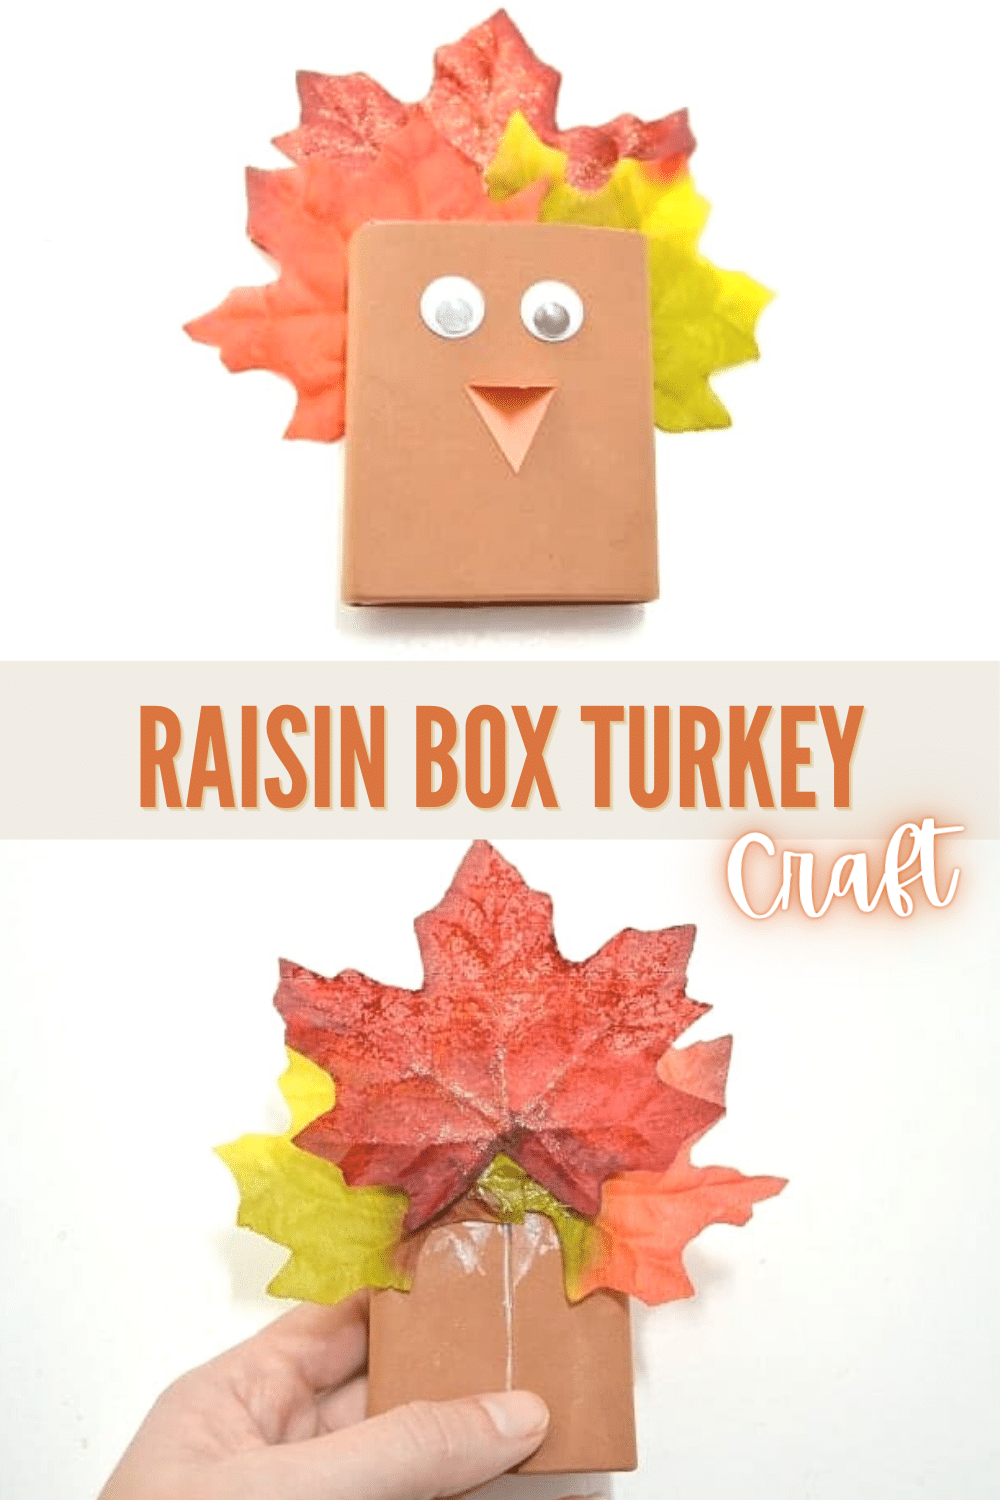 This raisin box turkey is a fun way to transform an ordinary snack into a fun treat that can double as a decoration for the kids table at Thanksgiving. #thanksgiving #craft #forkids #turkeycraft via @wondermomwannab